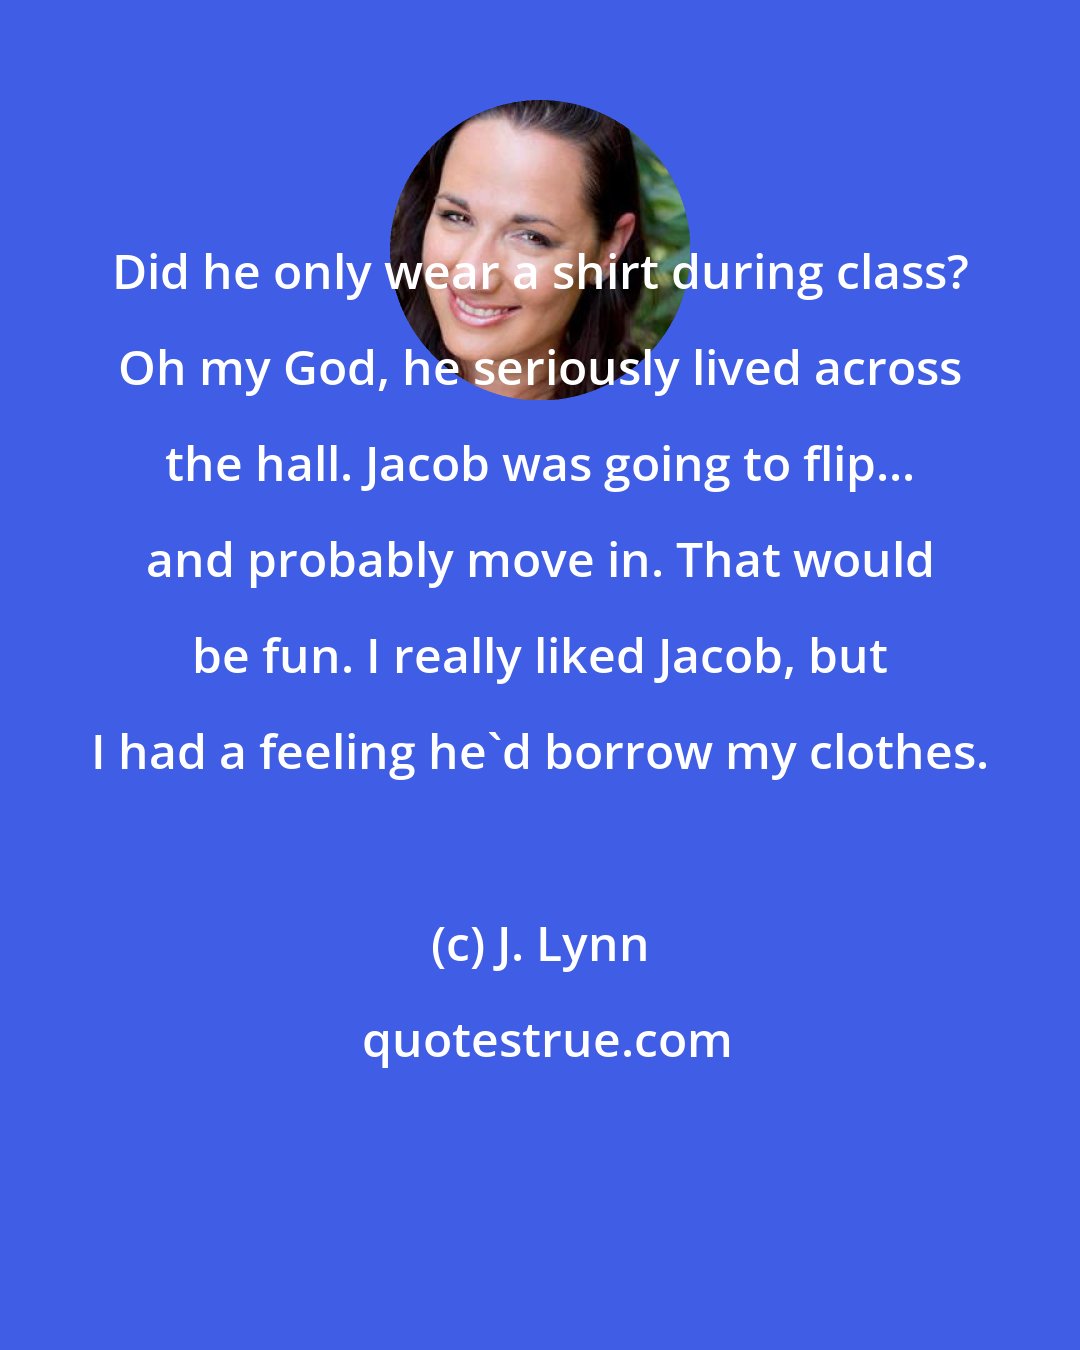 J. Lynn: Did he only wear a shirt during class? Oh my God, he seriously lived across the hall. Jacob was going to flip... and probably move in. That would be fun. I really liked Jacob, but I had a feeling he'd borrow my clothes.